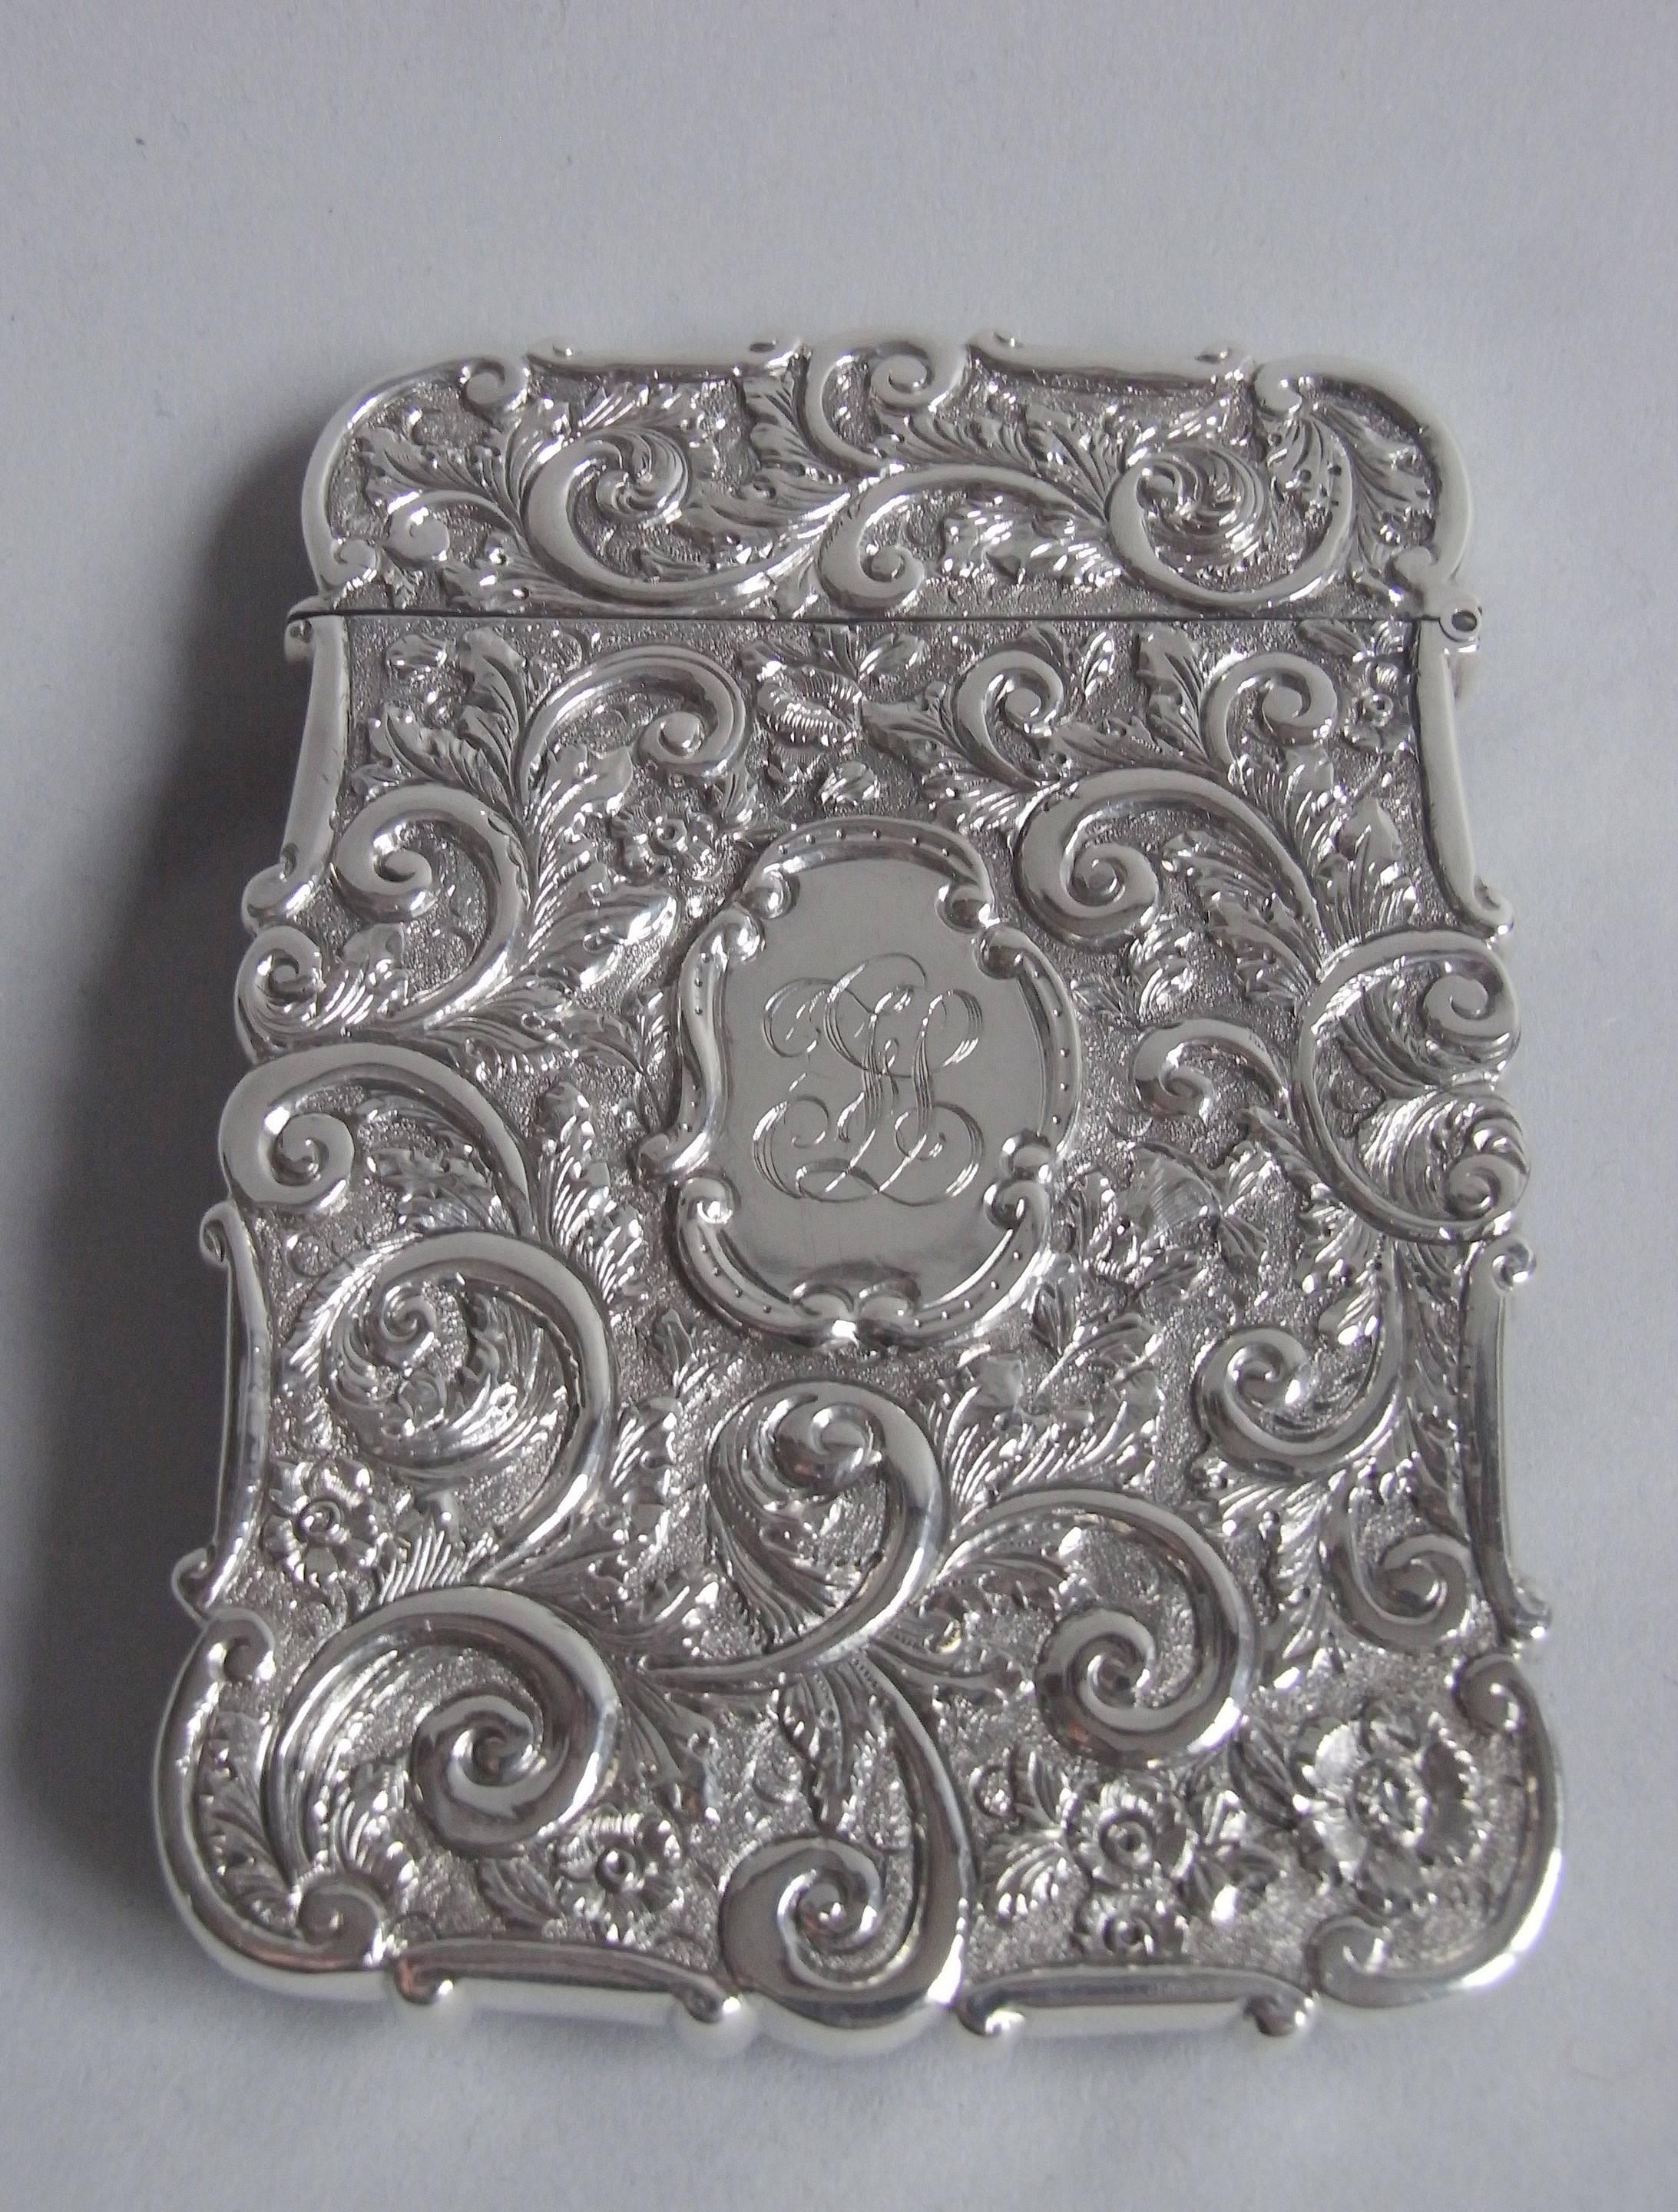 The card case is broad rectangular in form and displays a very rare detailed crisp view of York Minster, in high relief. The scene is surrounded by foliate scrolls and flower heads on a matted ground. The reverse is also chased with scroll work,